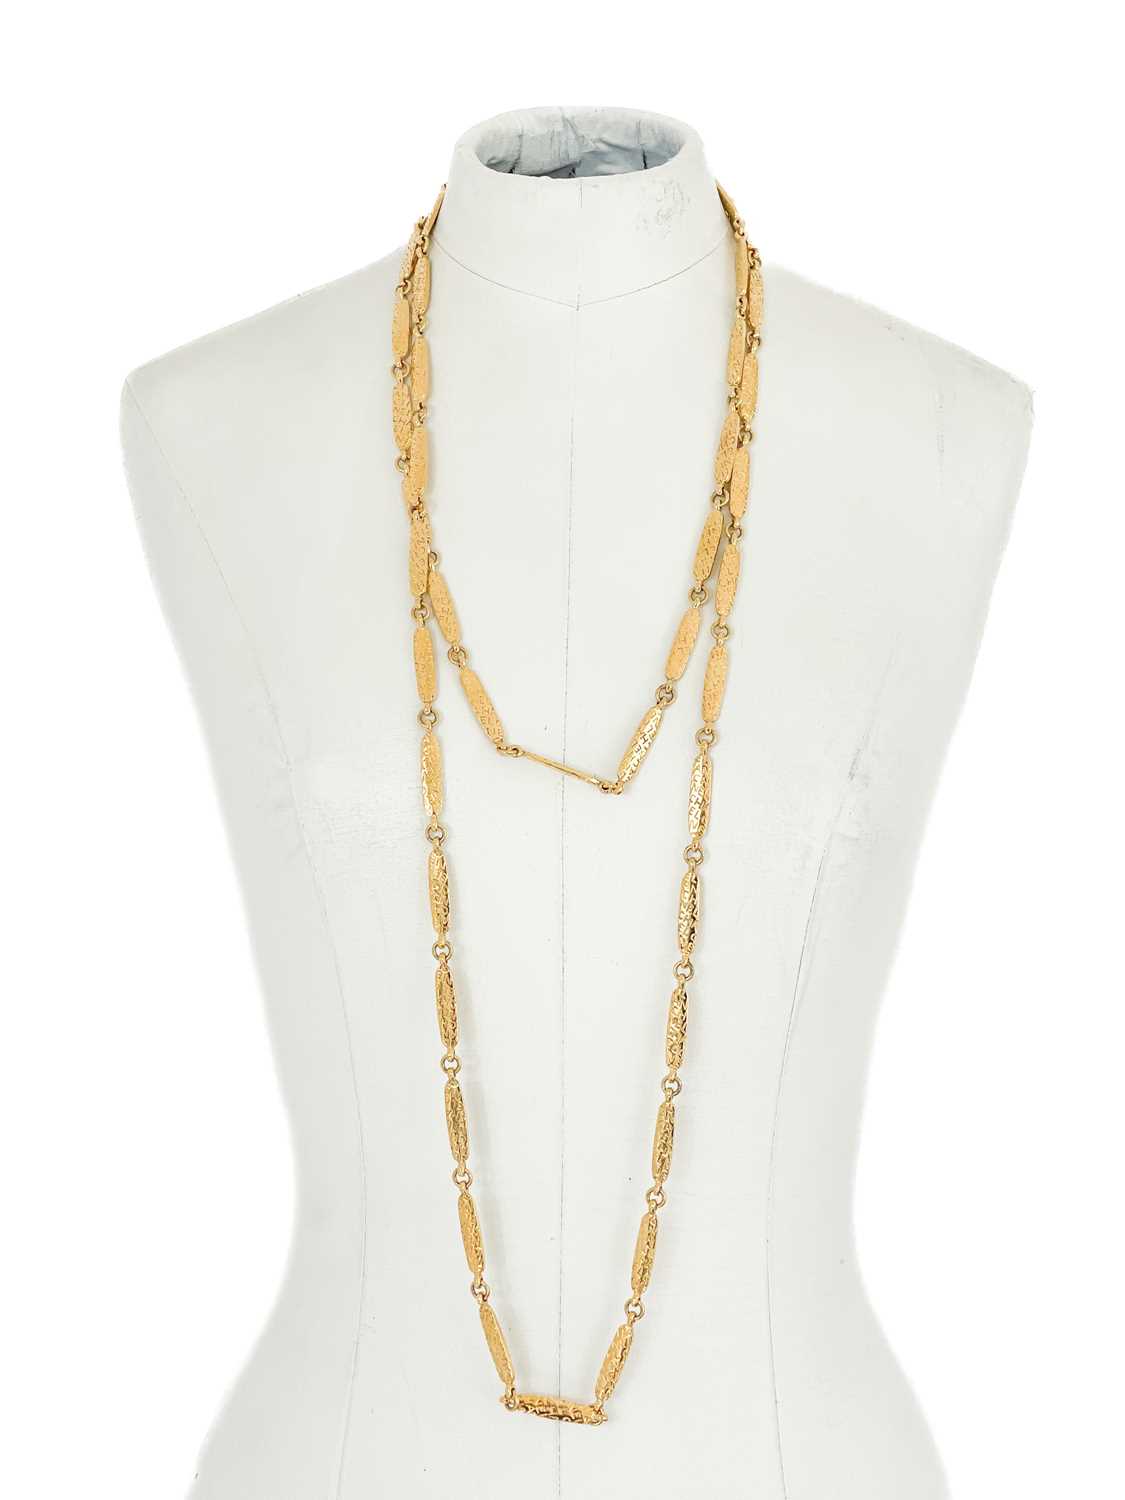 A Chanel 24ct gold-plated bar link extremely long necklace, circa 1990/91. - Image 2 of 3